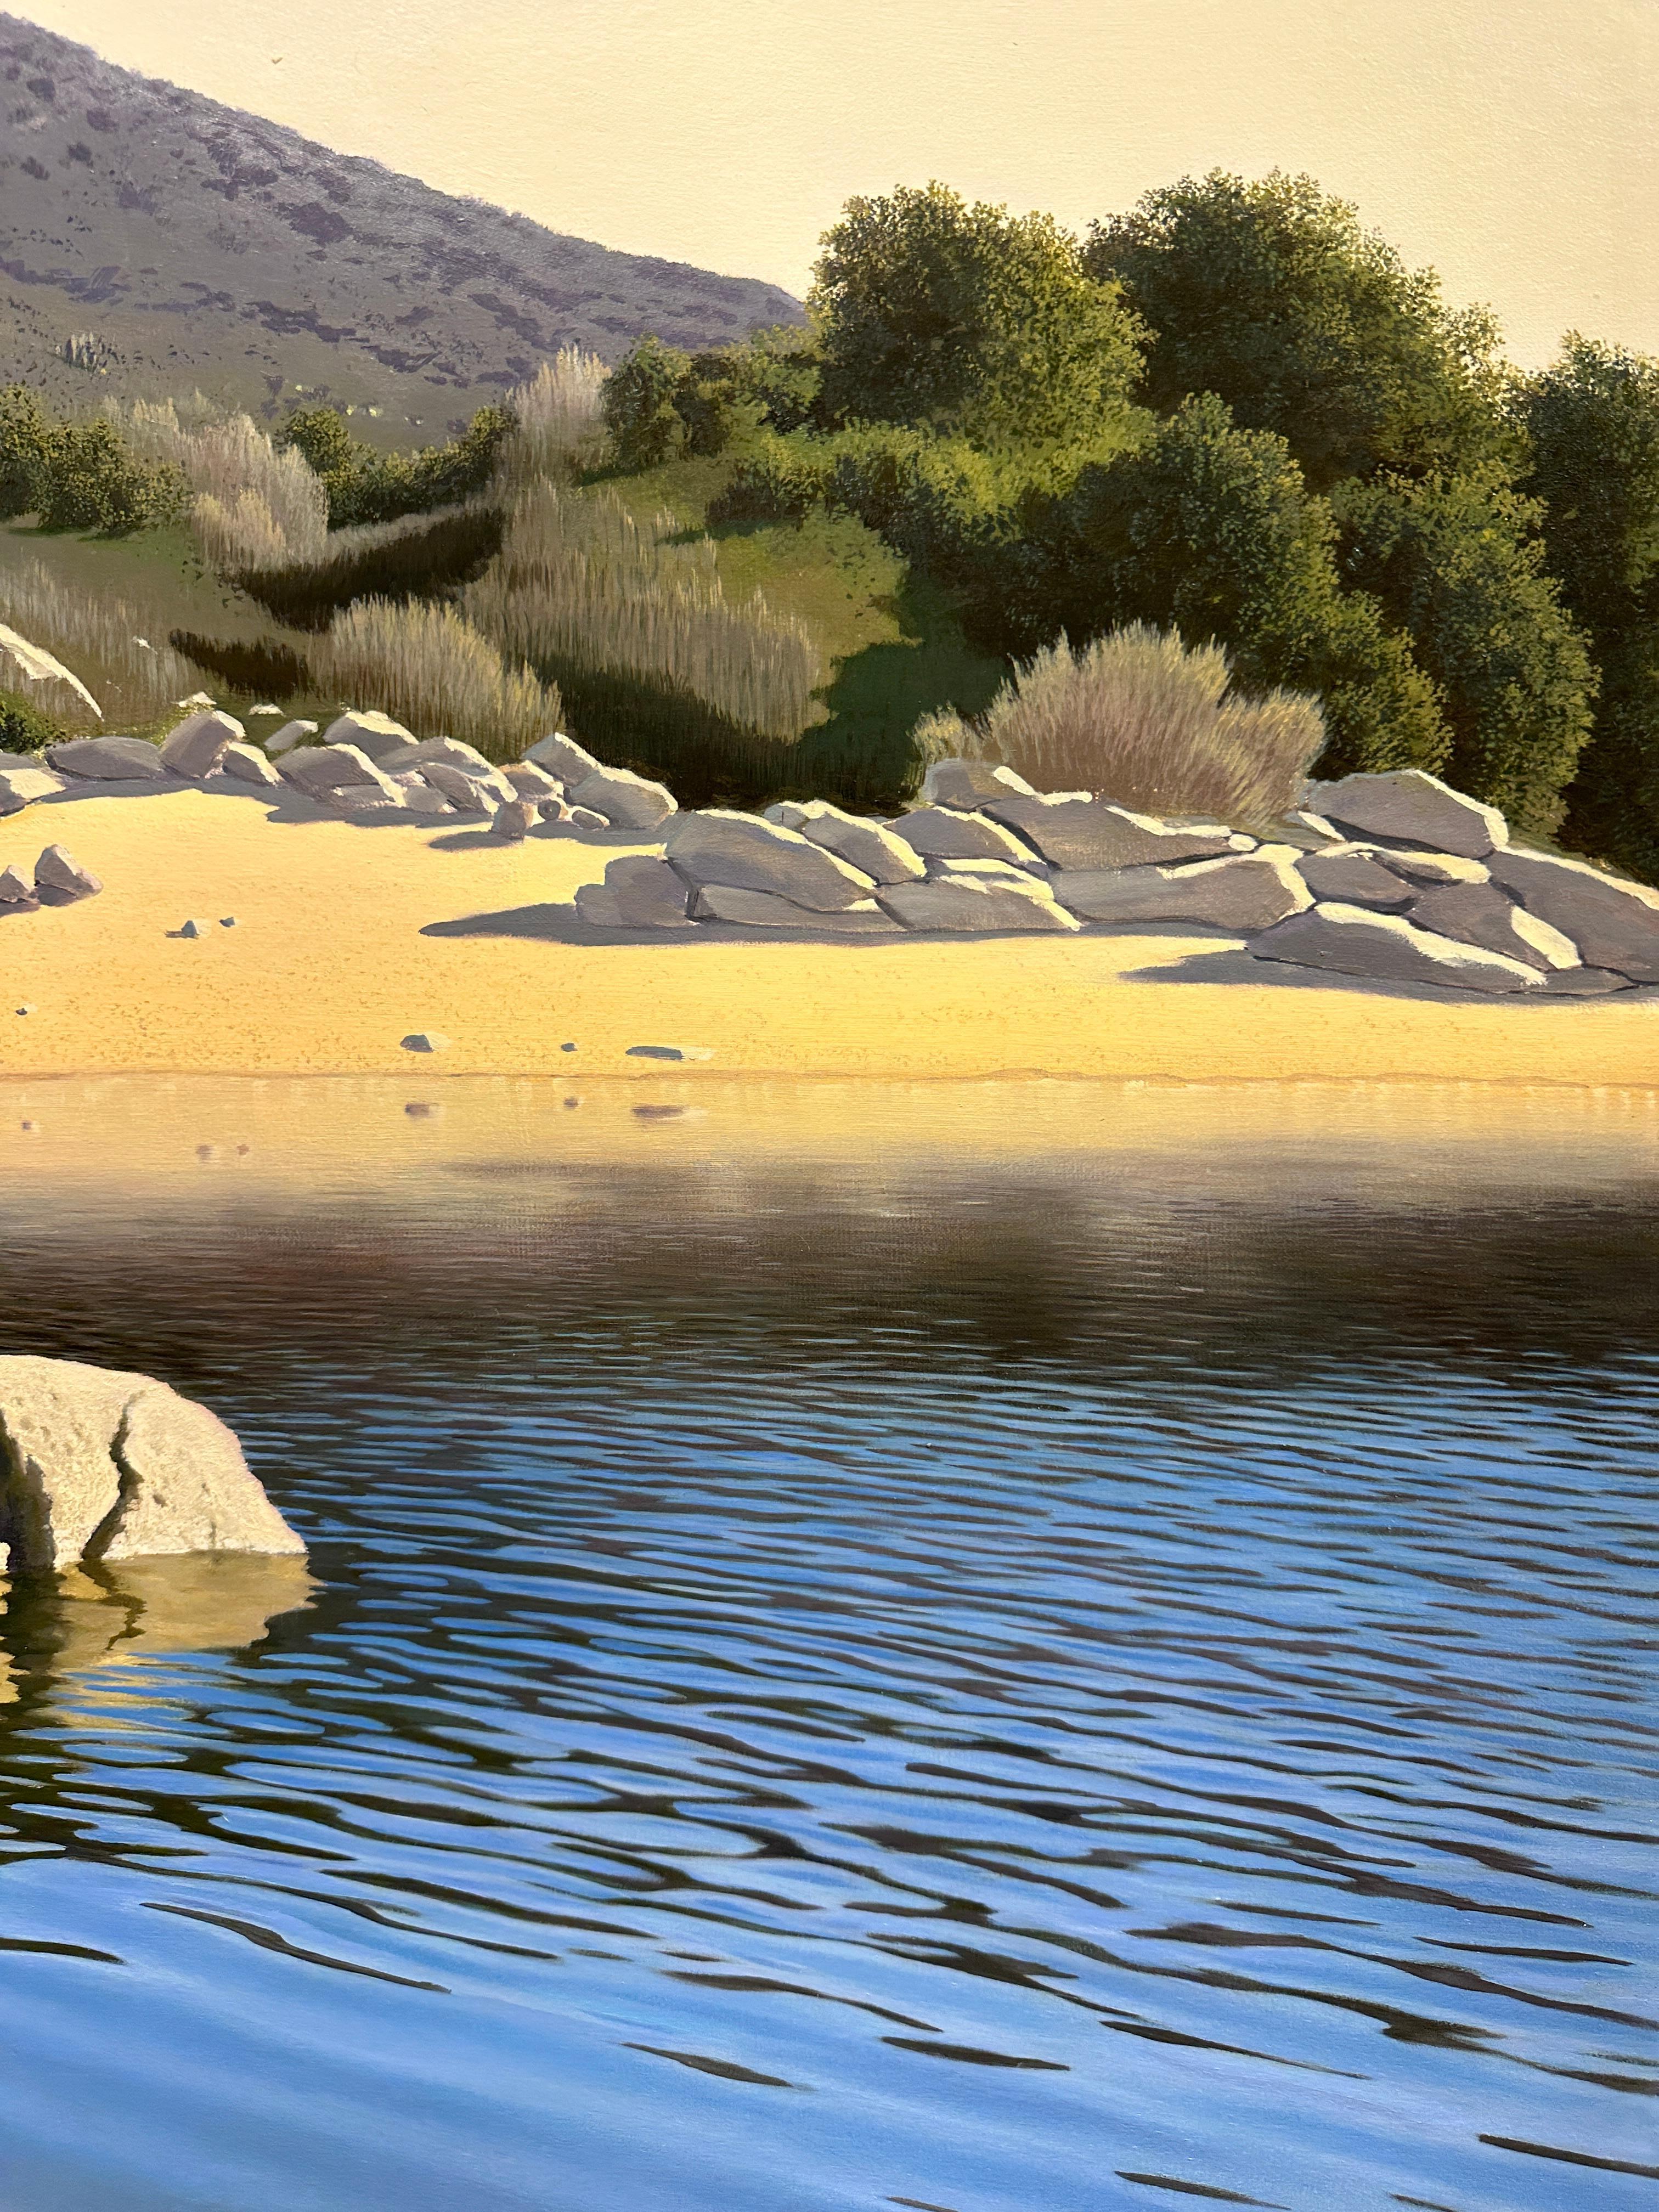 La Sugerencia (The Suggestion) - Surreal River Scene with Crystal Clear Water - Realist Painting by René Monzón Relova “Pozas”